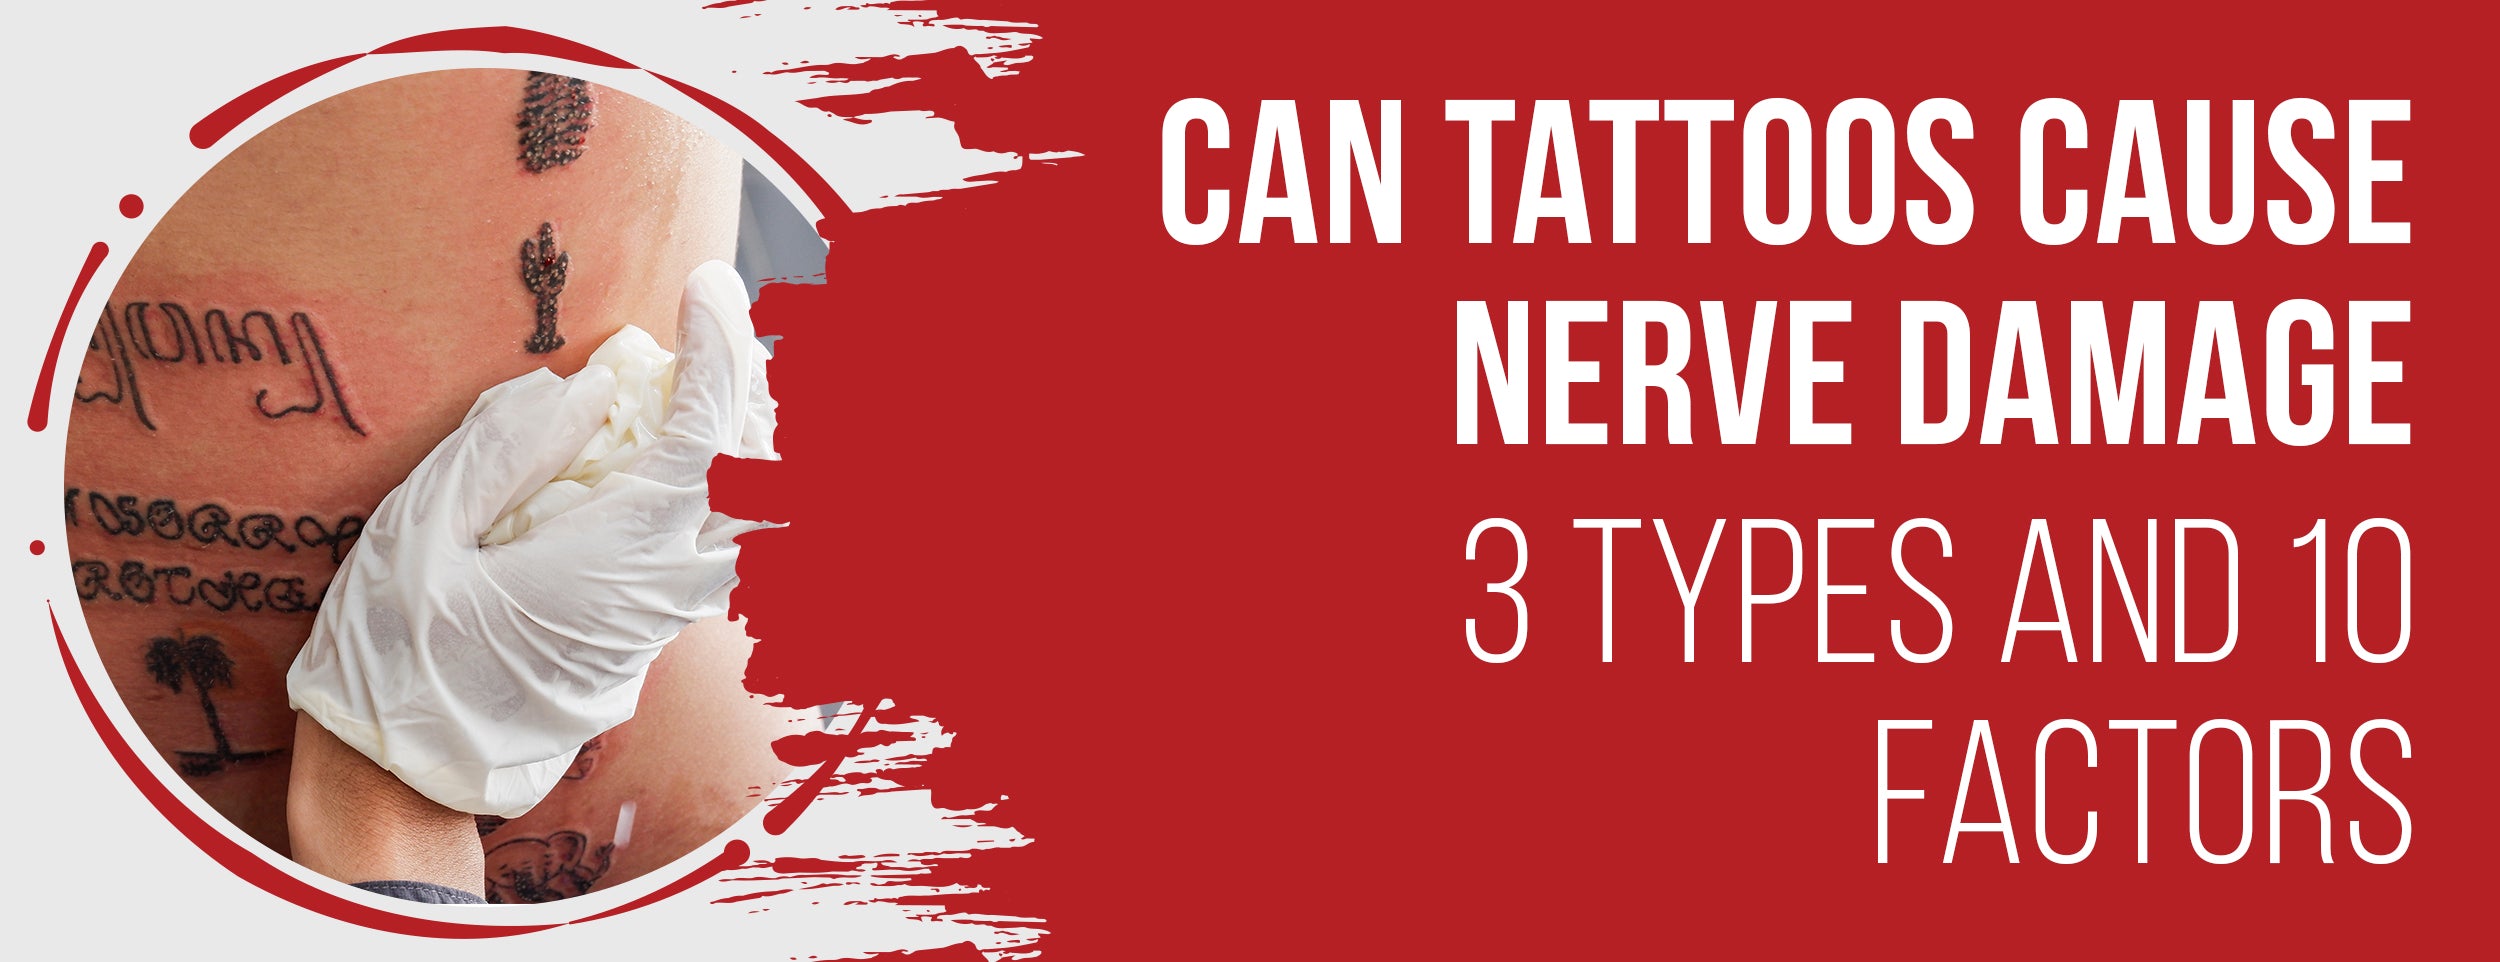 10 factors and 3 types of tattoos that can cause nerve damage